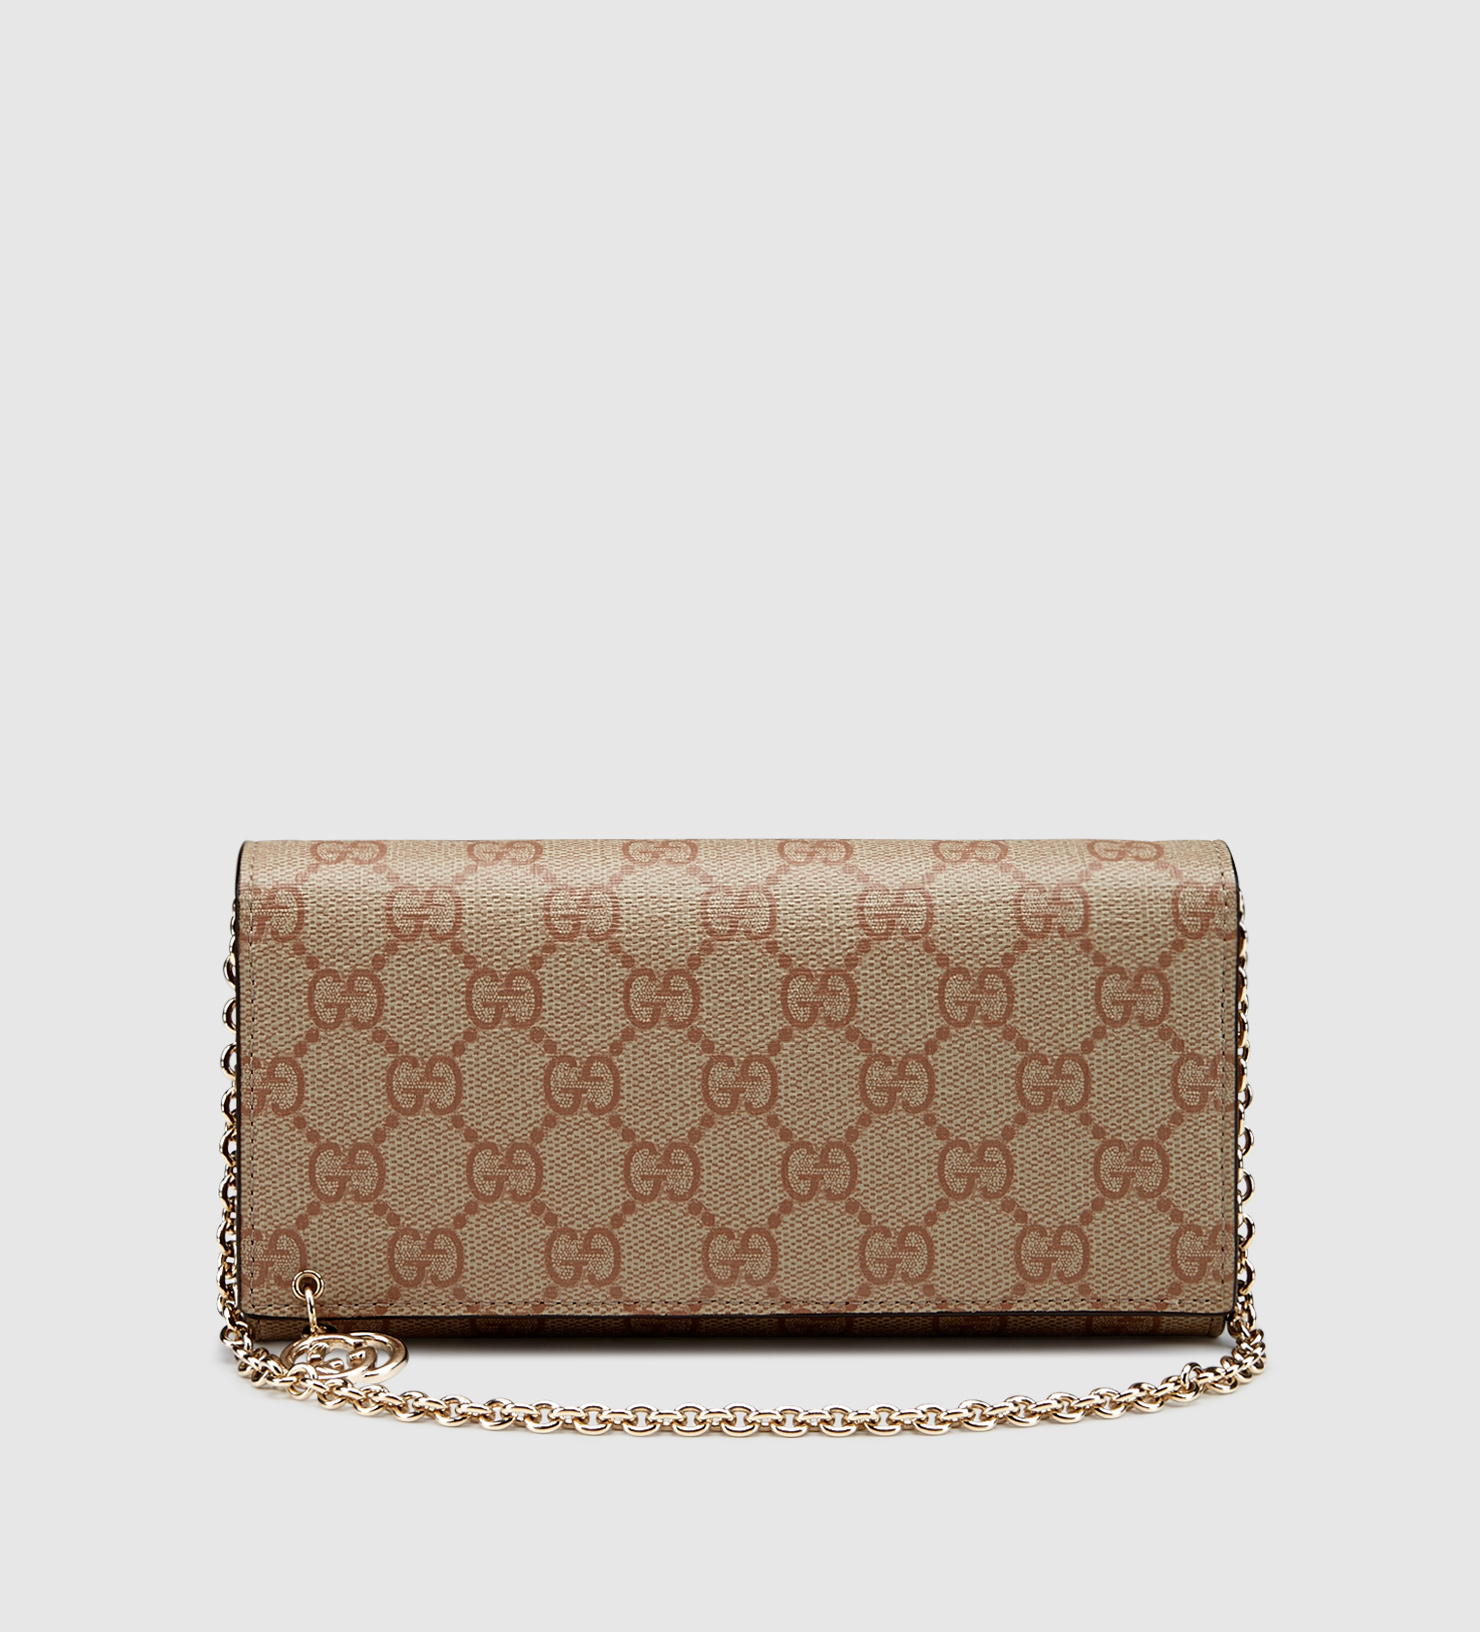 Lyst - Gucci Gg Supreme Canvas Chain Wallet in Natural